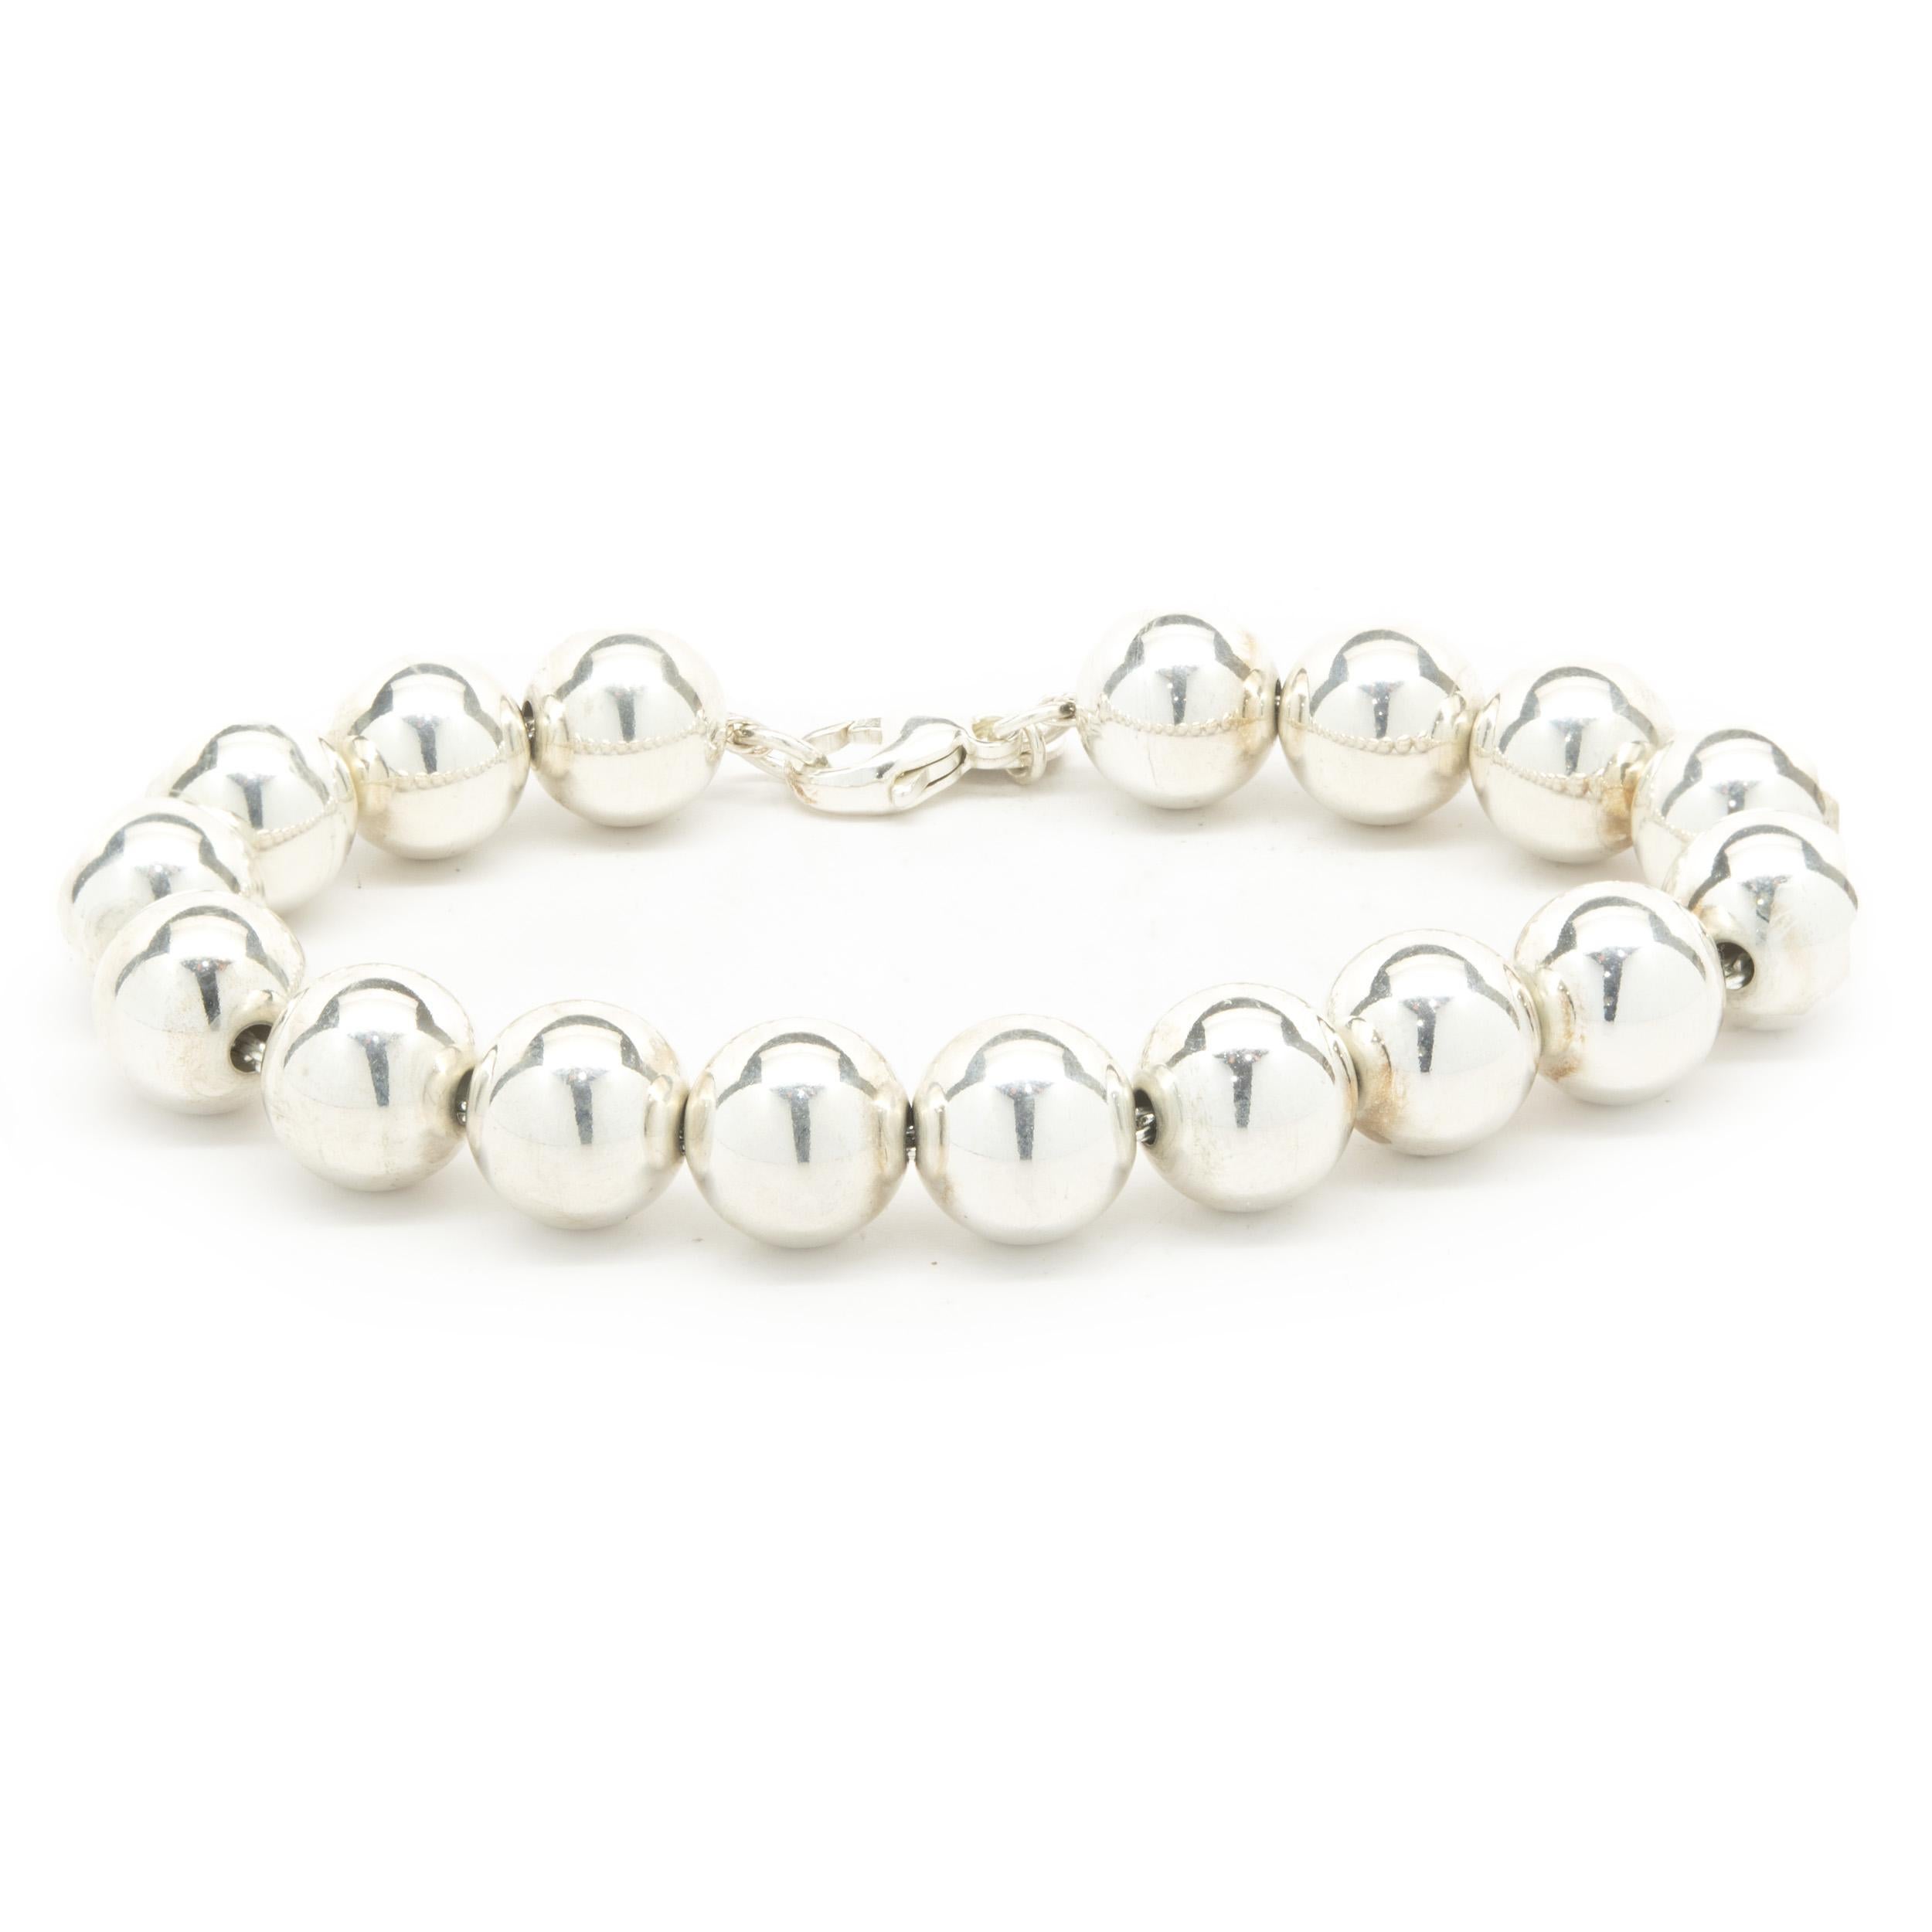 Designer: Tiffany & Co.
Material: sterling silver
Dimensions: bracelet measures 7-inches
Weight: 17.60 grams